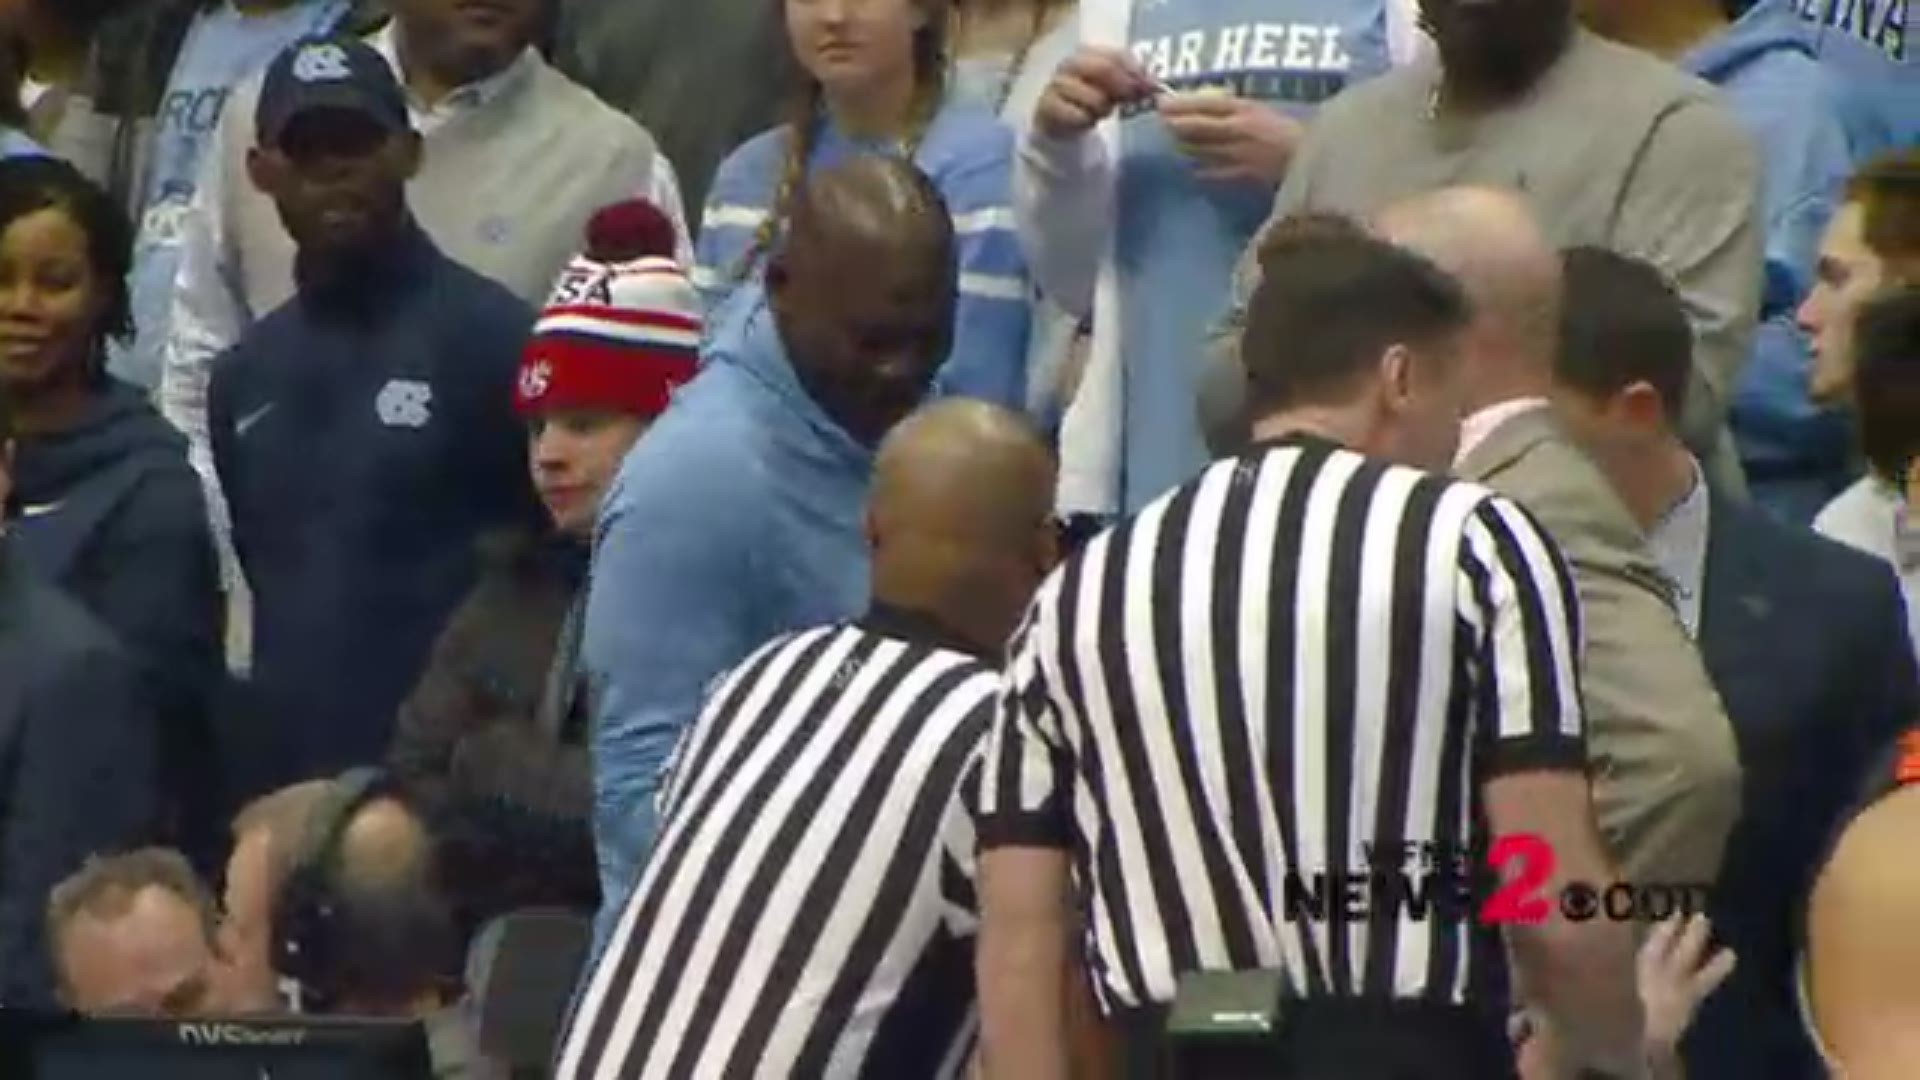 Michael Jordan along with fellow Tar Heels alums Mitch Kupchak and Buzz Peterson were spotted at tonight's North Carolina vs. Virginia game.